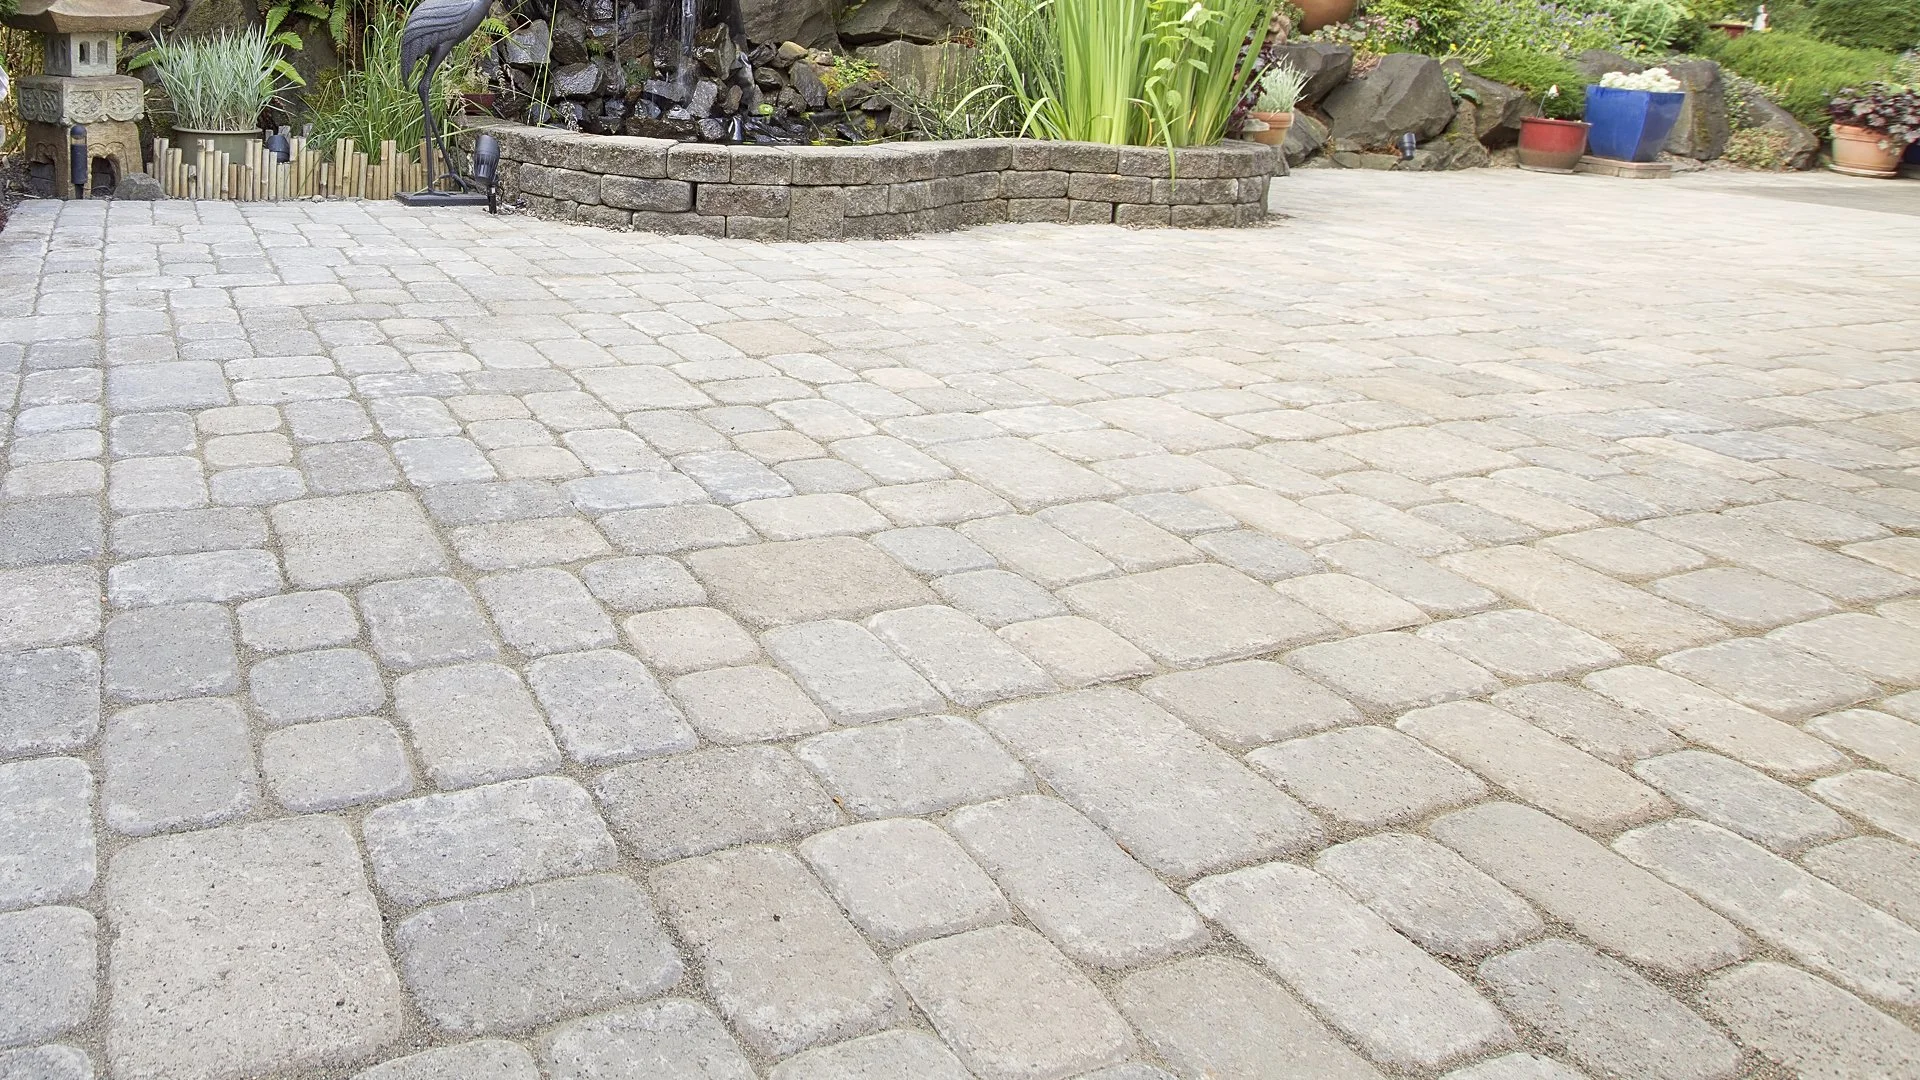 Poured Concrete vs Concrete Pavers - Which Is the Better Material for a Patio?